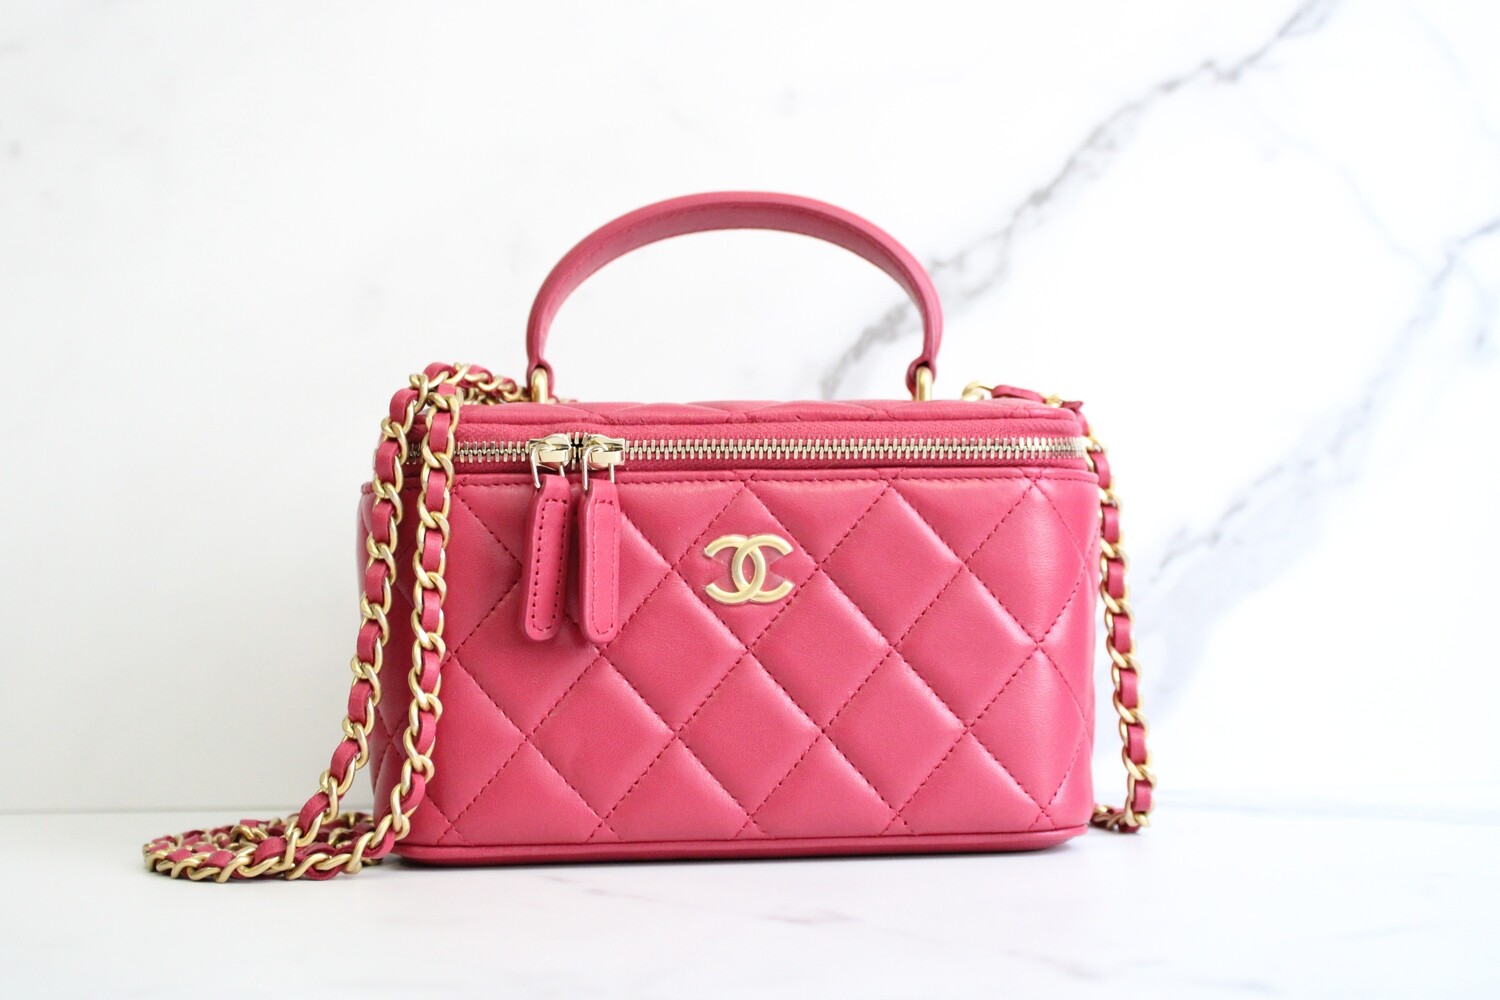 Chanel Vanity Rectangle with Top Handle, 21A Dark Pink Lambskin Leather,  Gold Hardware, New in Box MA001 - Julia Rose Boston